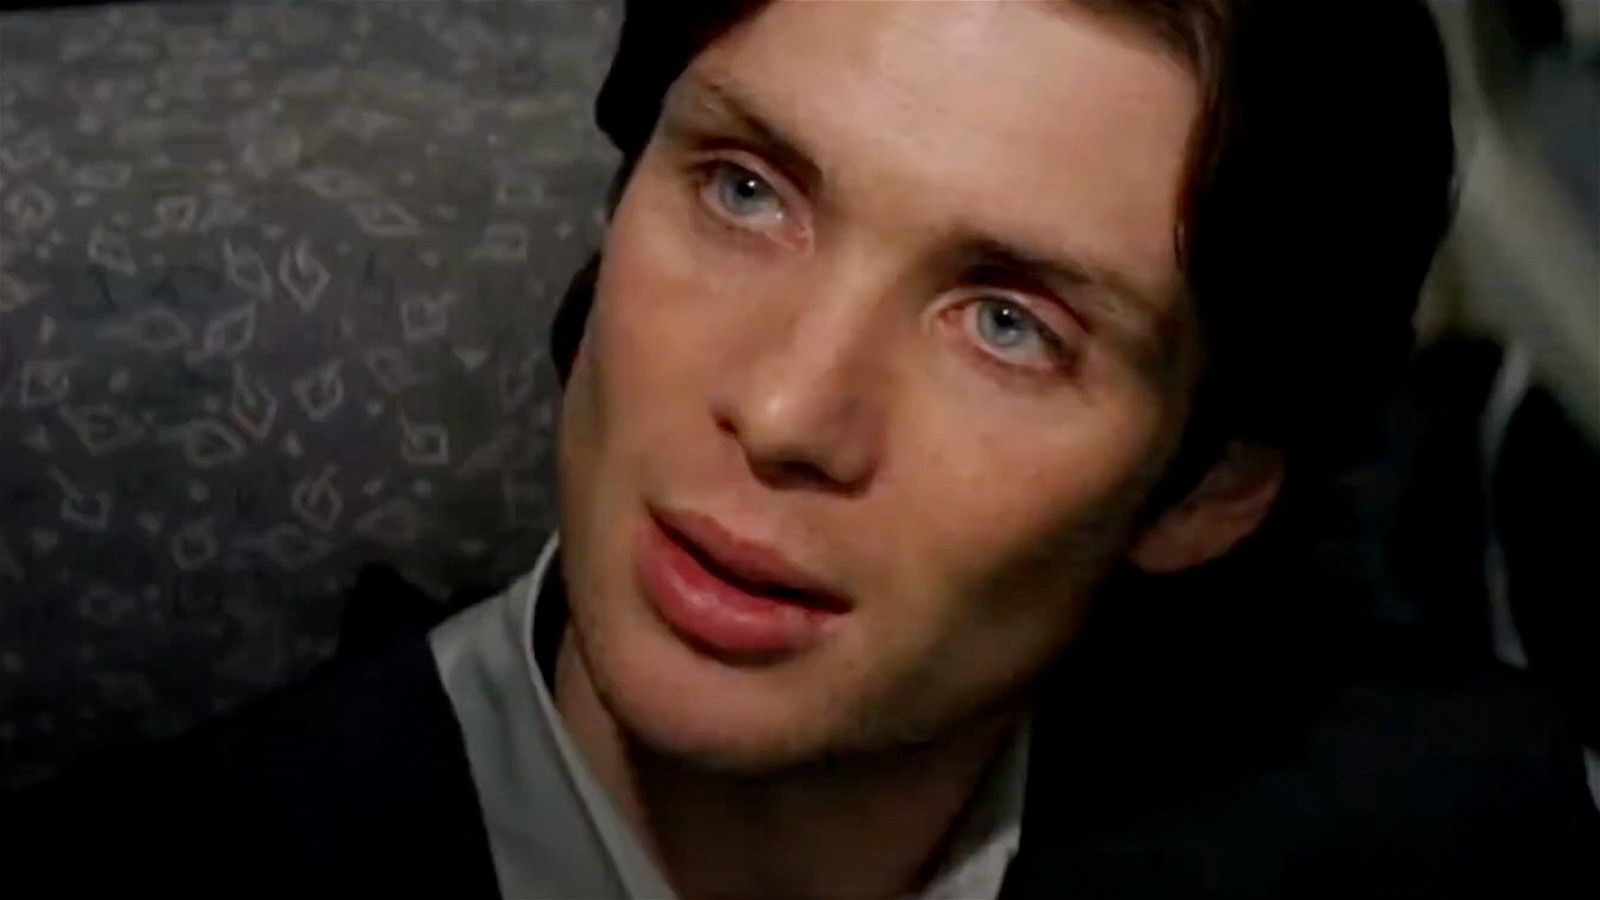 Cillian Murphy put a terrifying performance as Jackson Rippner in Red Eye